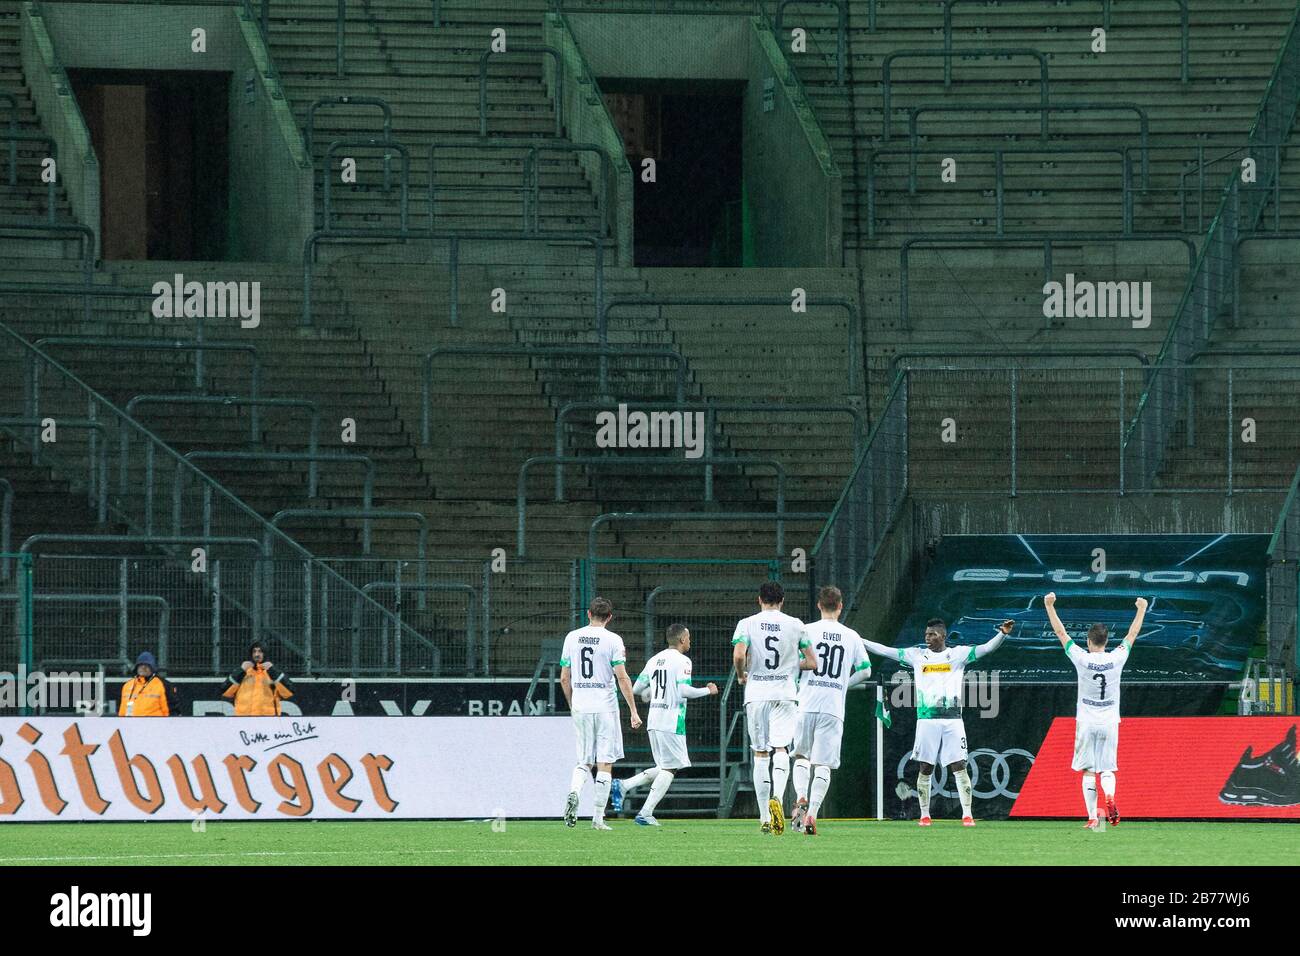 Mönchengladbach, Germany, Borussiapark, 11.03.2020: Team Gladbach celebrate a goal in front of an empty stadium with empty places during the Bundeslig Stock Photo